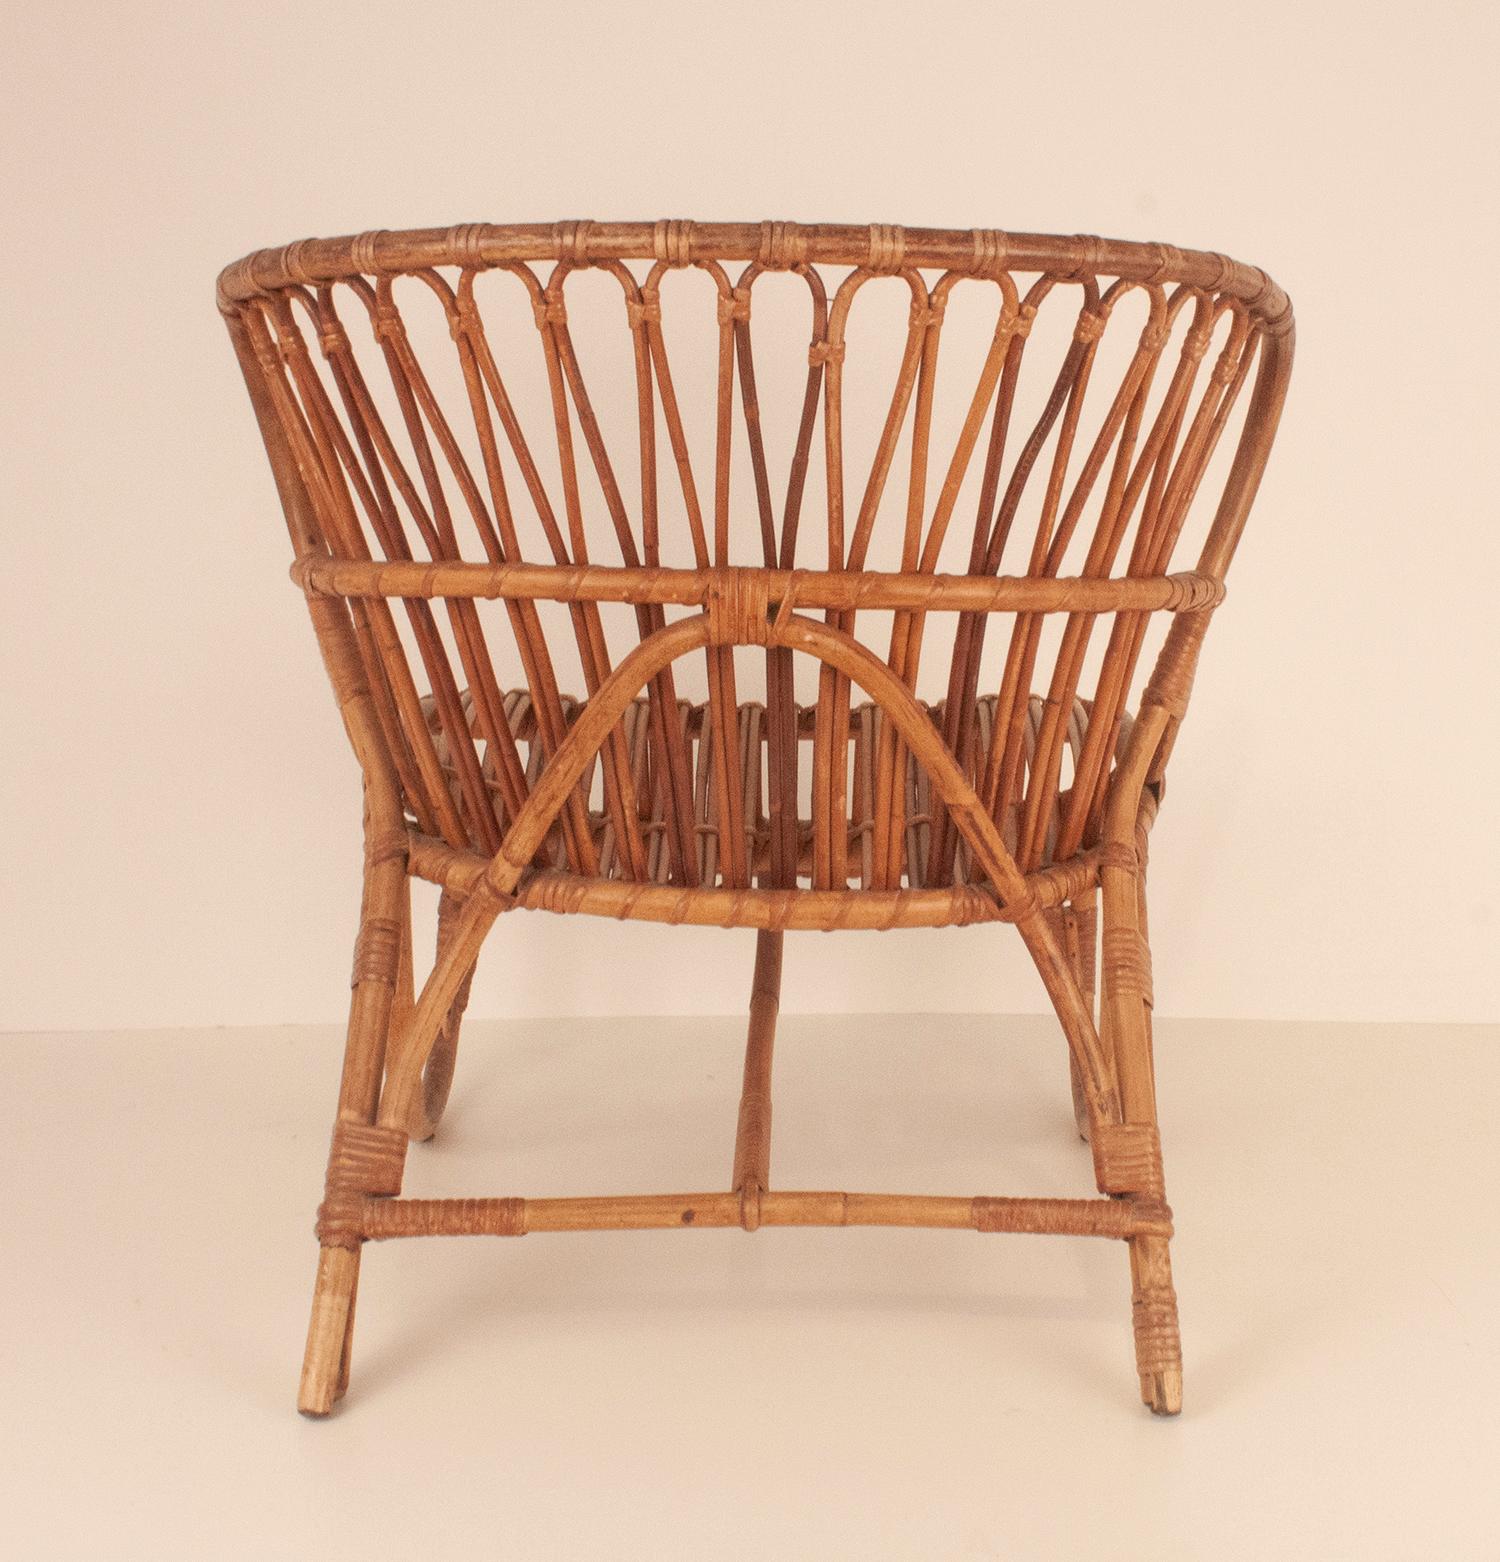 Bamboo and rattan armchair in the style of Viggo Boesen, Netherlands 50's
Very comfortable.